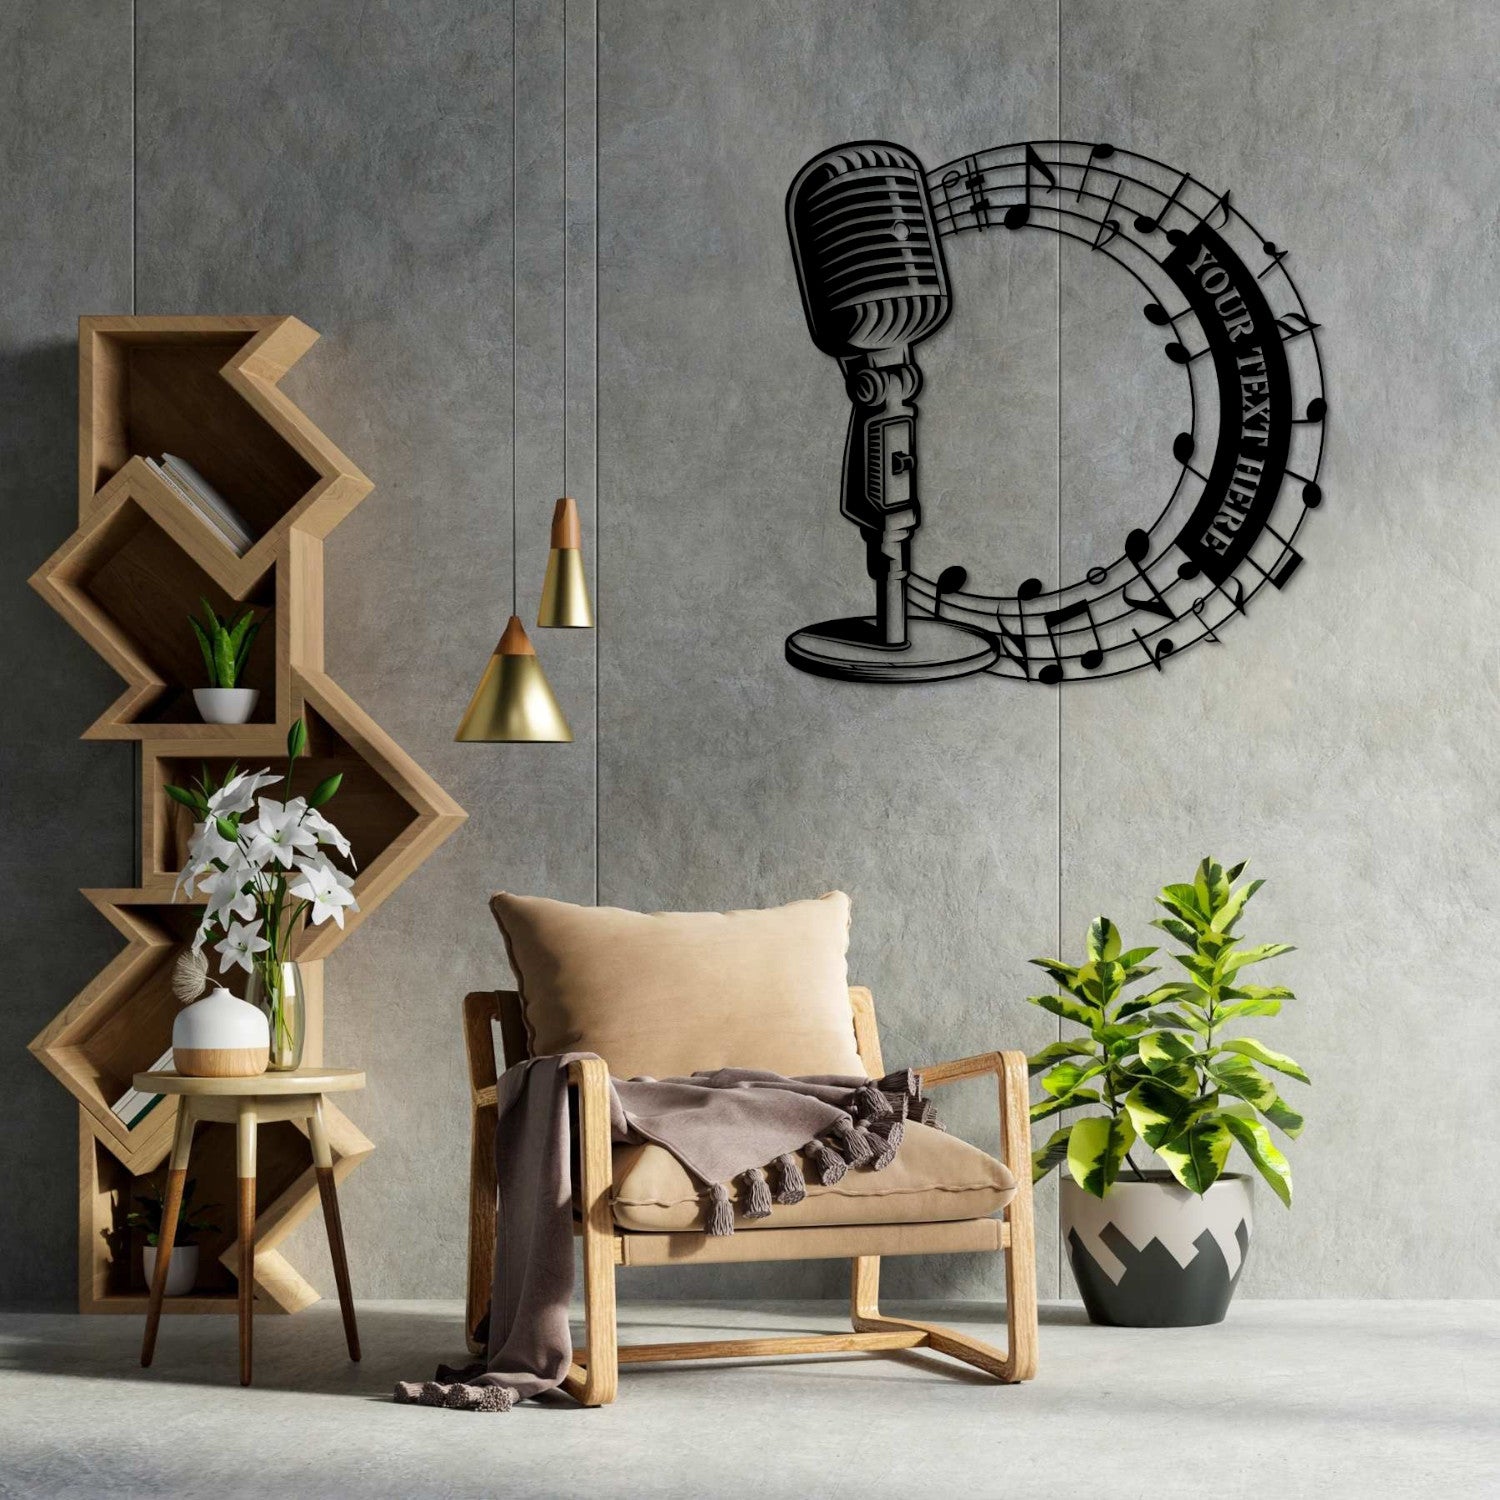 Personalized Microphone Metal Sign. Custom Singer Wall Decor. Musician Entertainer Gifts. Musical Notes Wall Hanging. Gift For Vocalist.